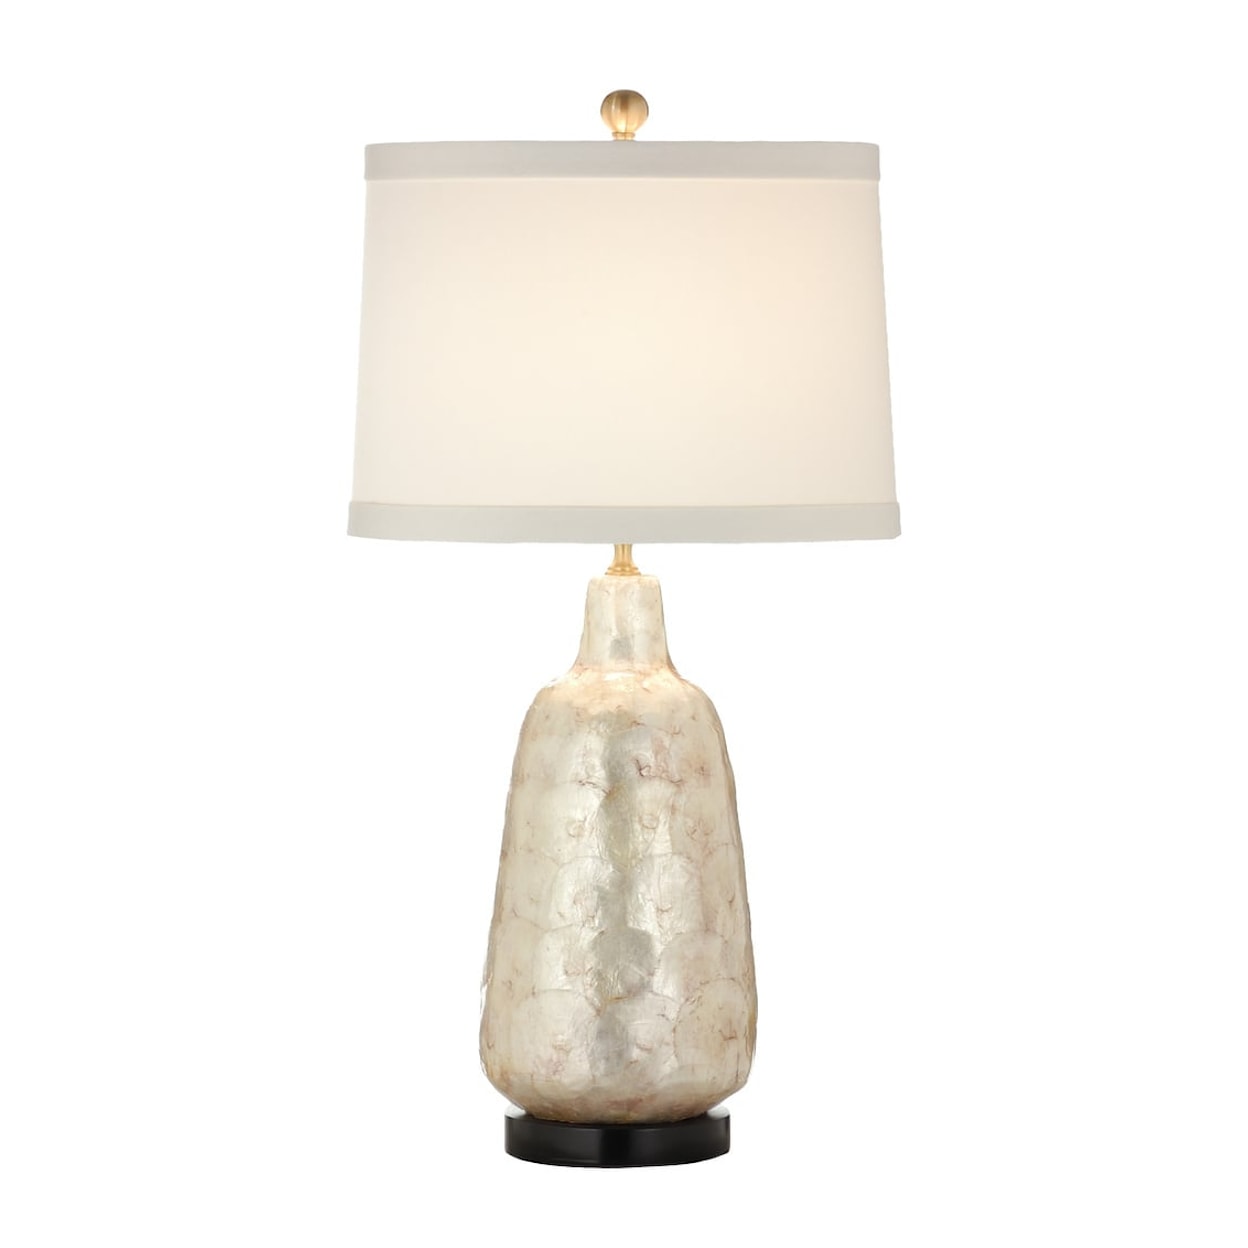 Wildwood Lamps Table Lamps Shell Vase Lamp